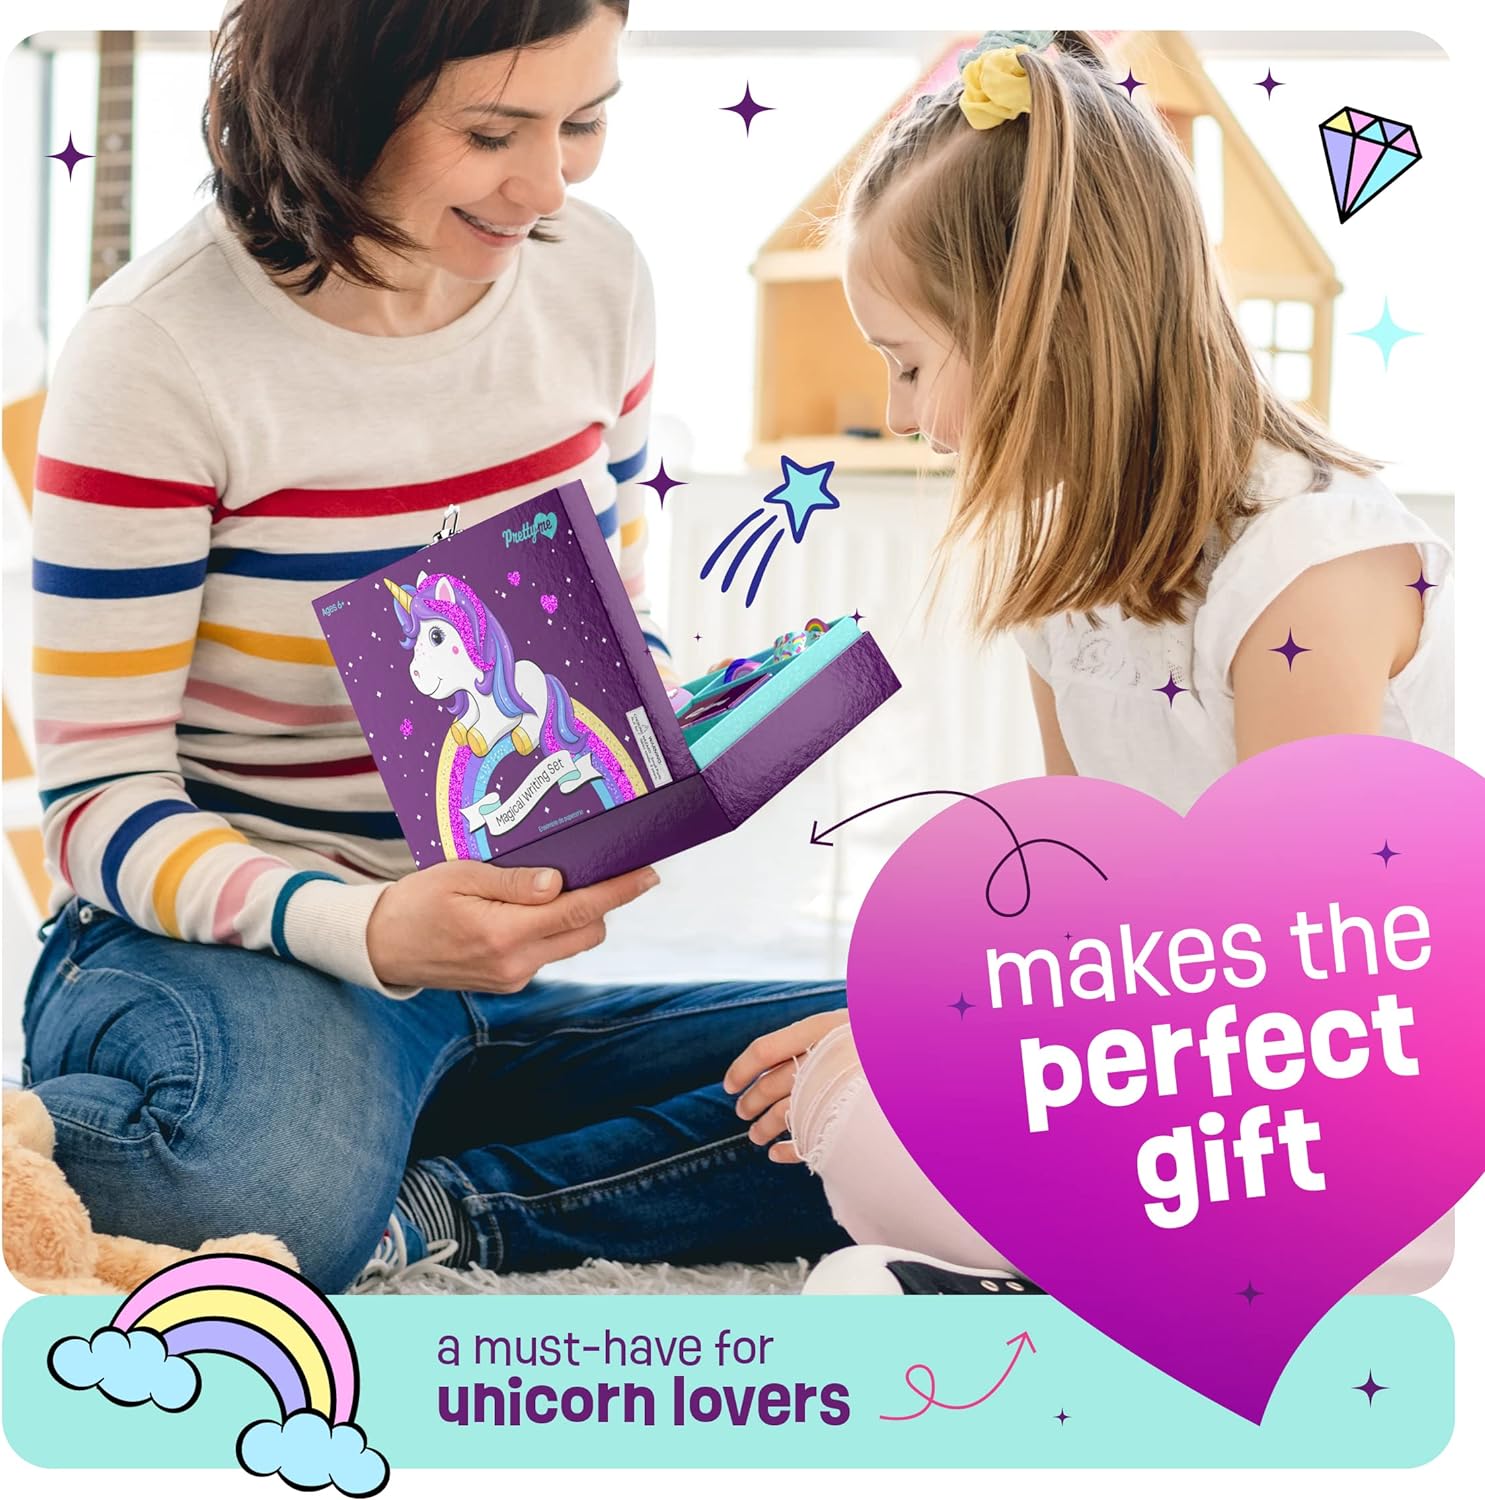 Unicorn Stationery Set for Kids - Unicorn Gifts for Girls Ages 6, 7, 8, 9, 10-12 Year Old - Stationary Letter Writing Kit - Best Girl Birthday Gift - Preteen Craft Toys, Christmas Presents